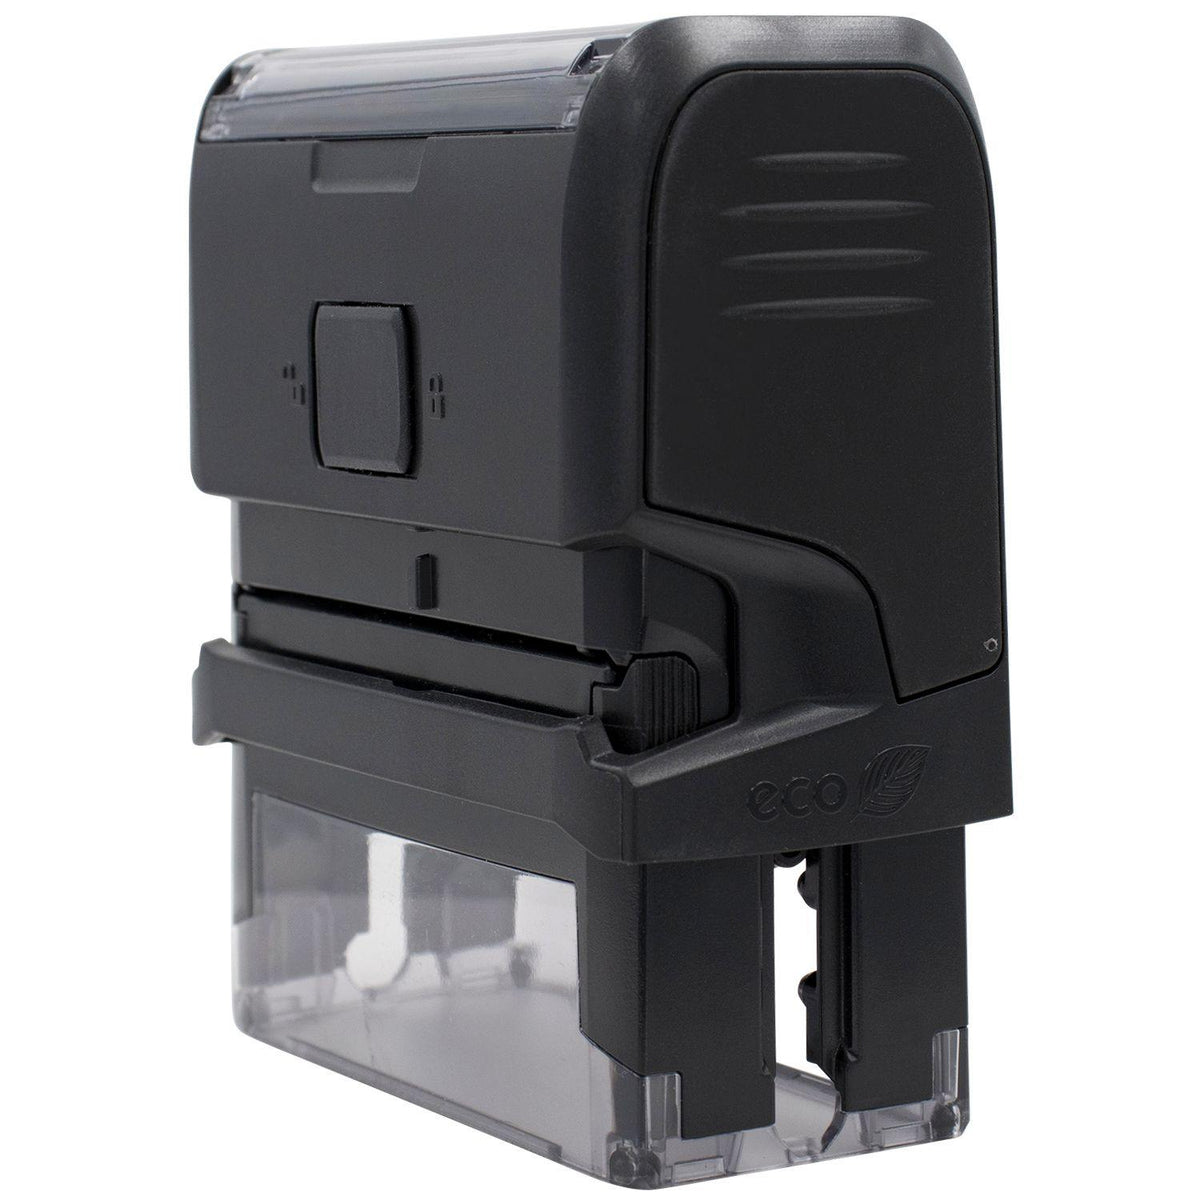 Large Self Inking Court Copy Stamp - Engineer Seal Stamps - Brand_Trodat, Impression Size_Large, Stamp Type_Self-Inking Stamp, Type of Use_Professional